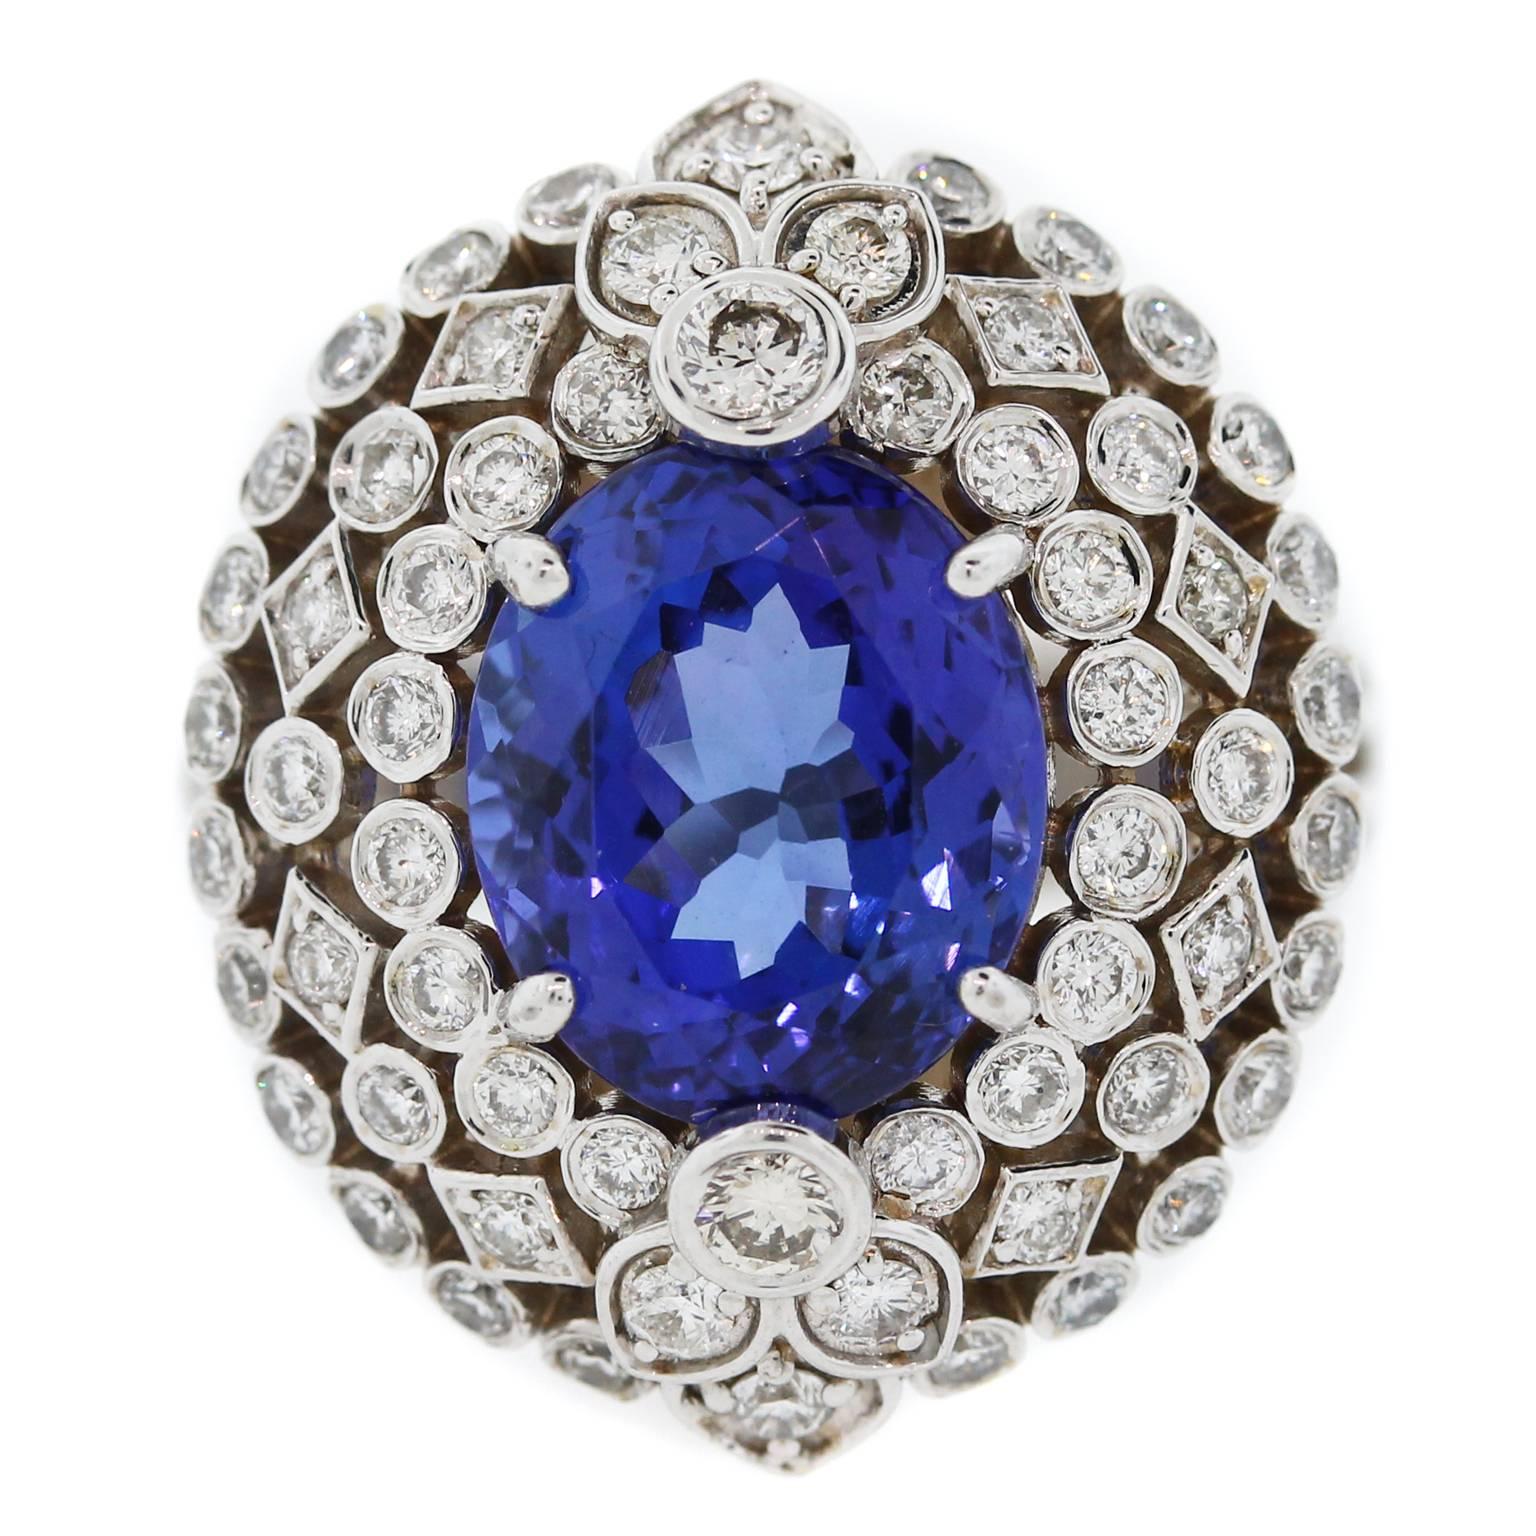 18K White Gold Ring with Tanzanite Center and Diamonds

Center Tanzanite: 11mm x 9mm, 5.57 ct. Beautiful color.

1.09 ct. G Color, VS Clarity Diamonds surround entire face of ring.

Open work design.

Currently size 6.5. Can be sized. 

ONE OF A KIND